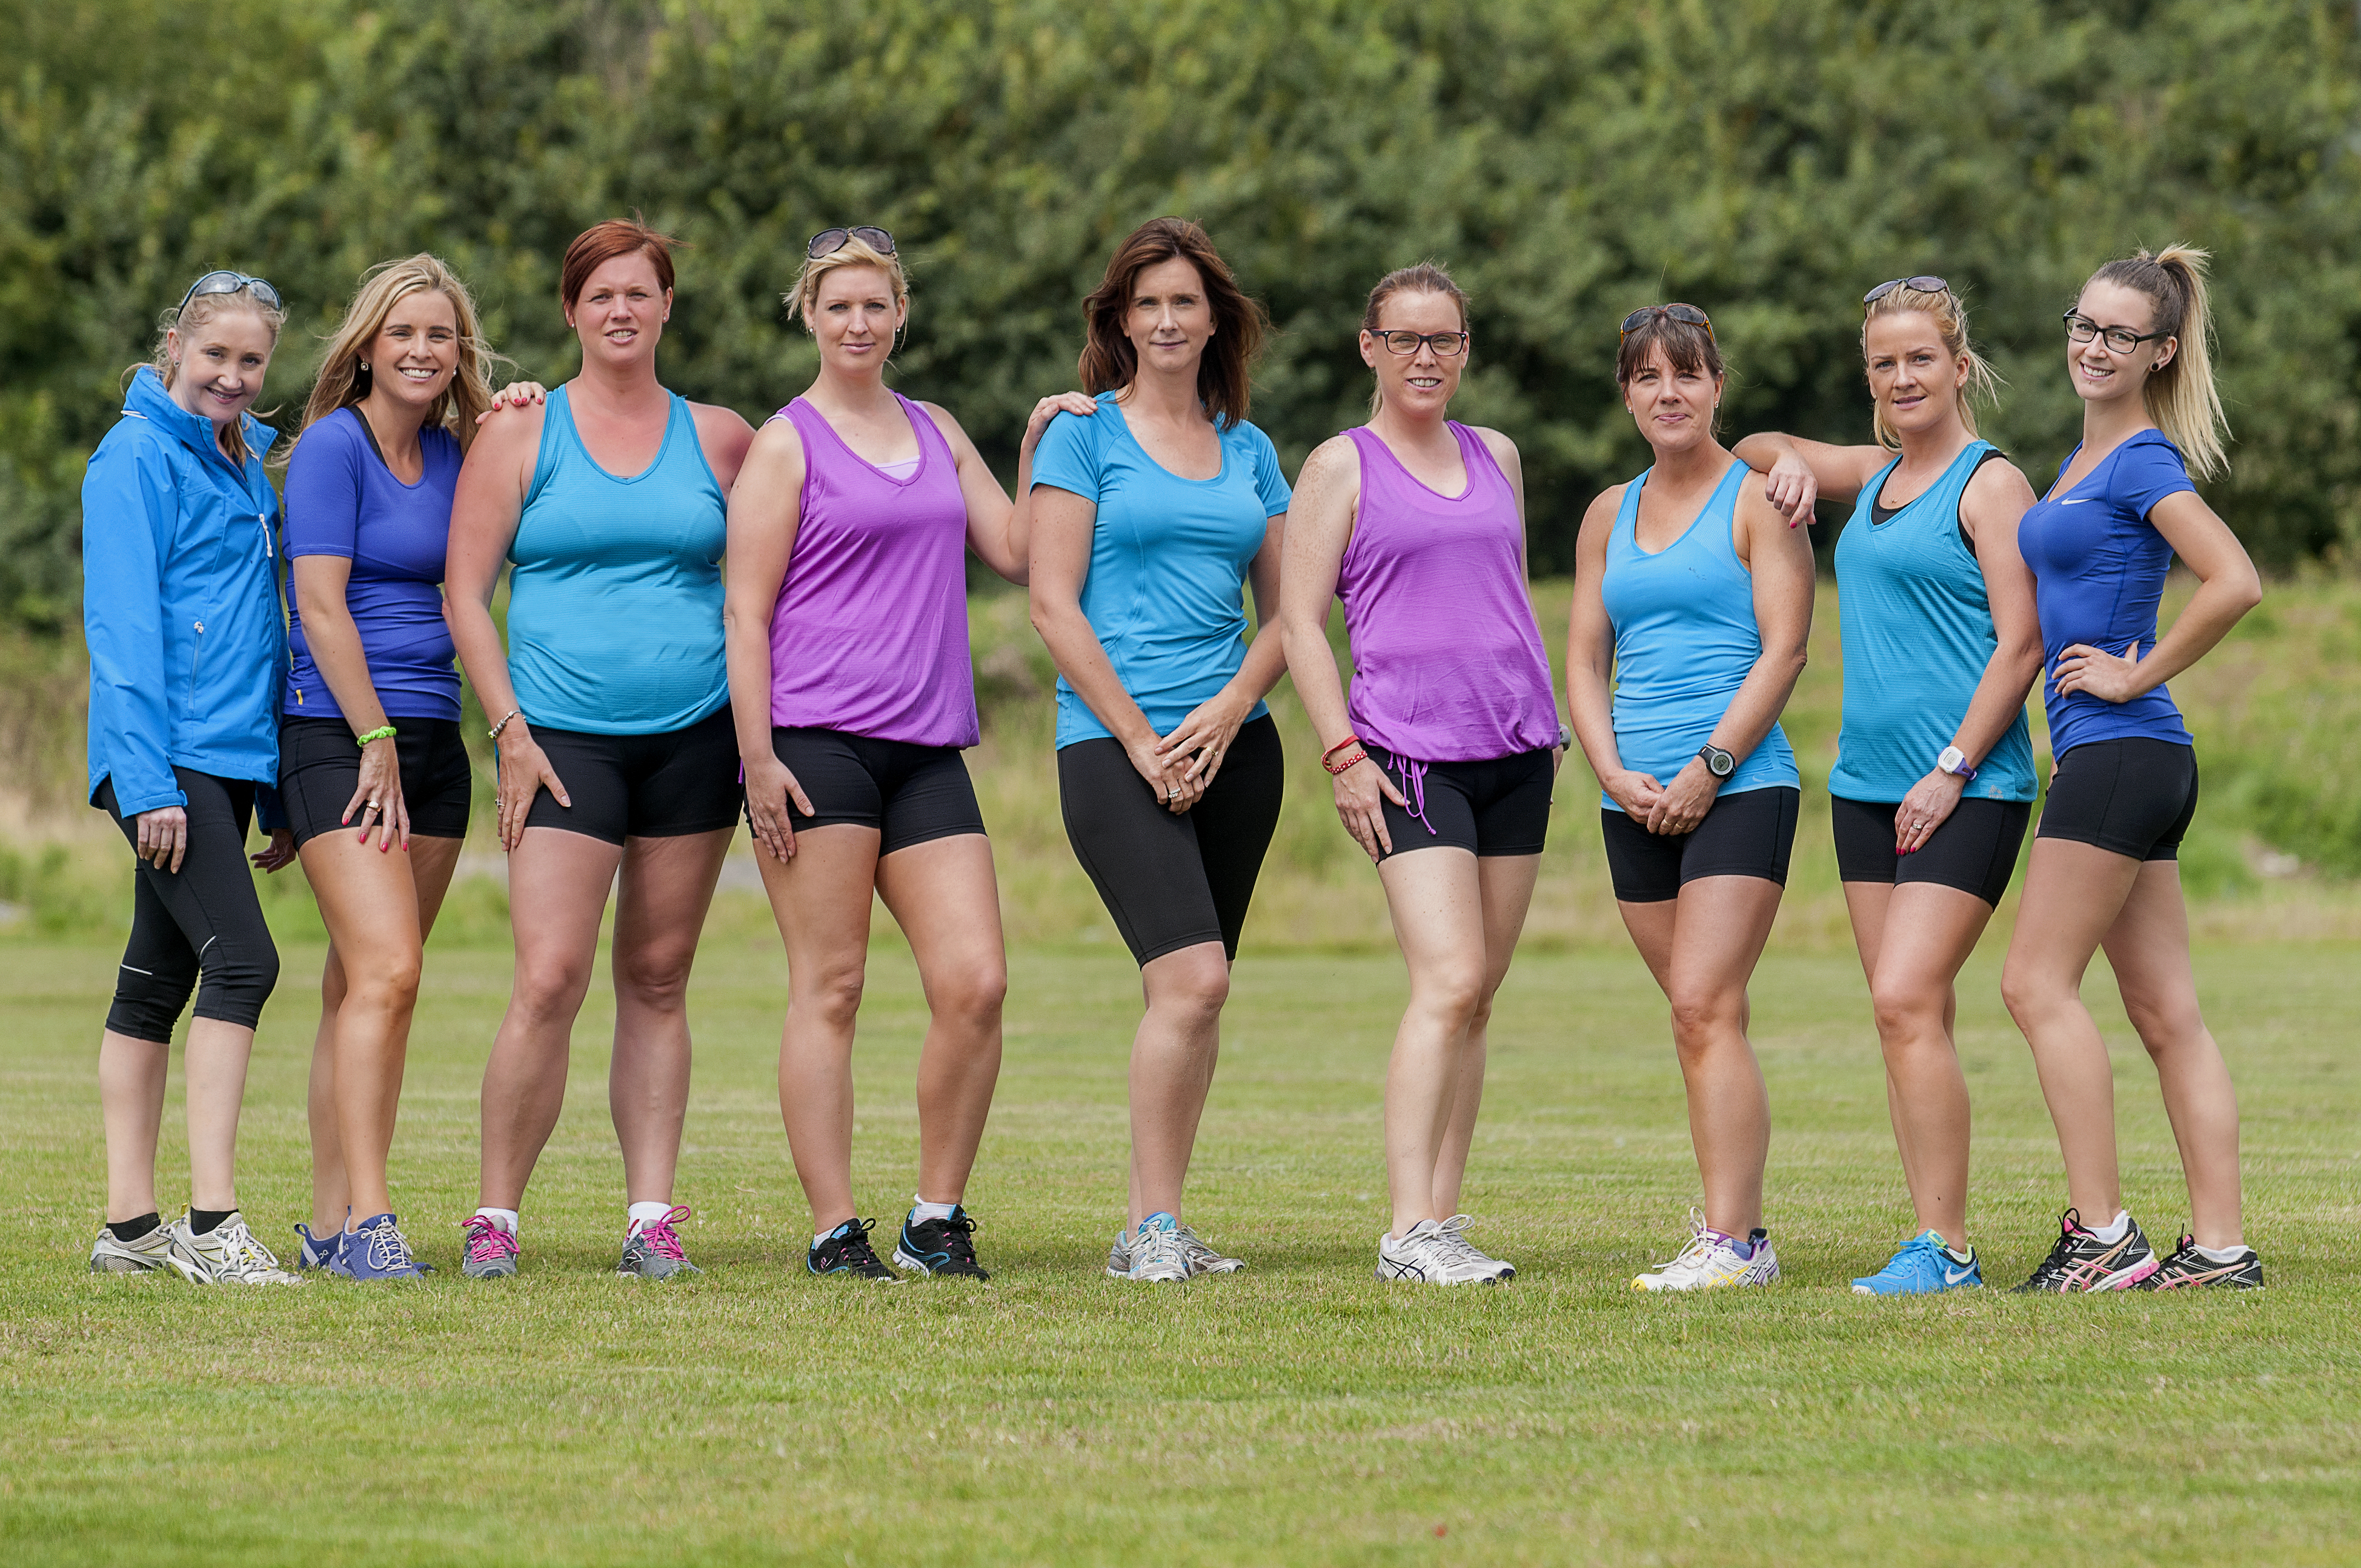 Women's Health Physiotherapy EVB Sports Wear: Supporting the